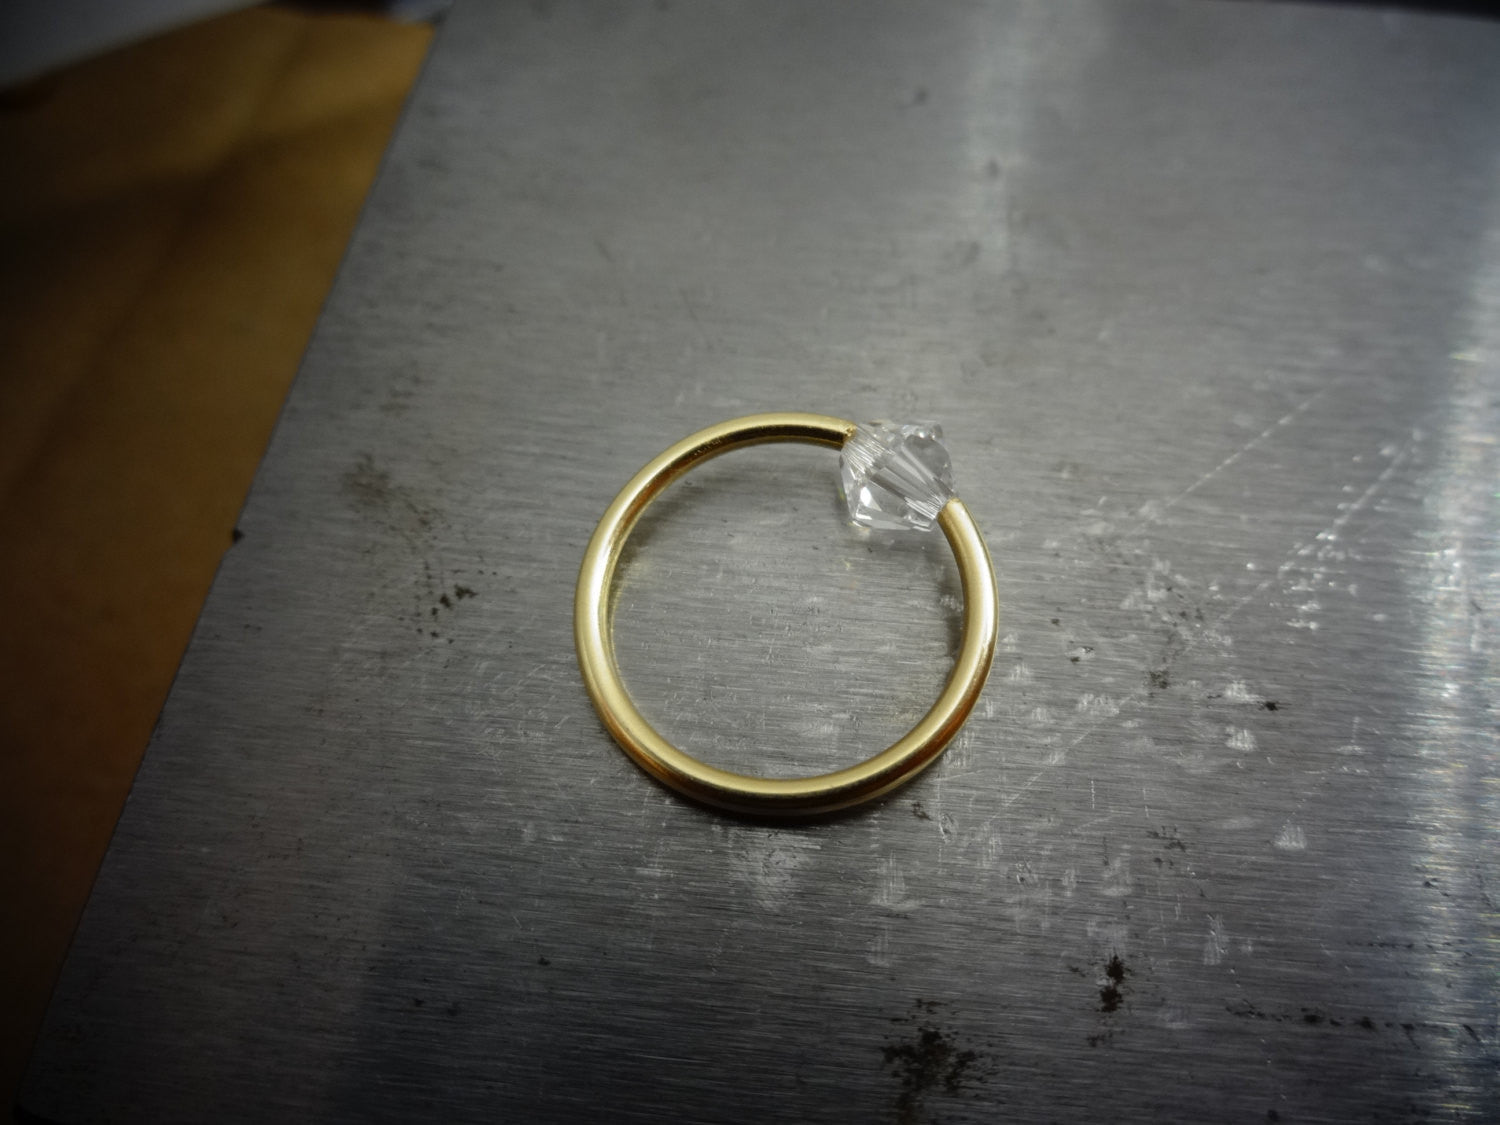 Captive Bead Ring made with 5mm CLEAR Swarovski Crystal - 14 ga Hoop - 14k Gold (Y, W, or R), Sterling Silver, or Platinum